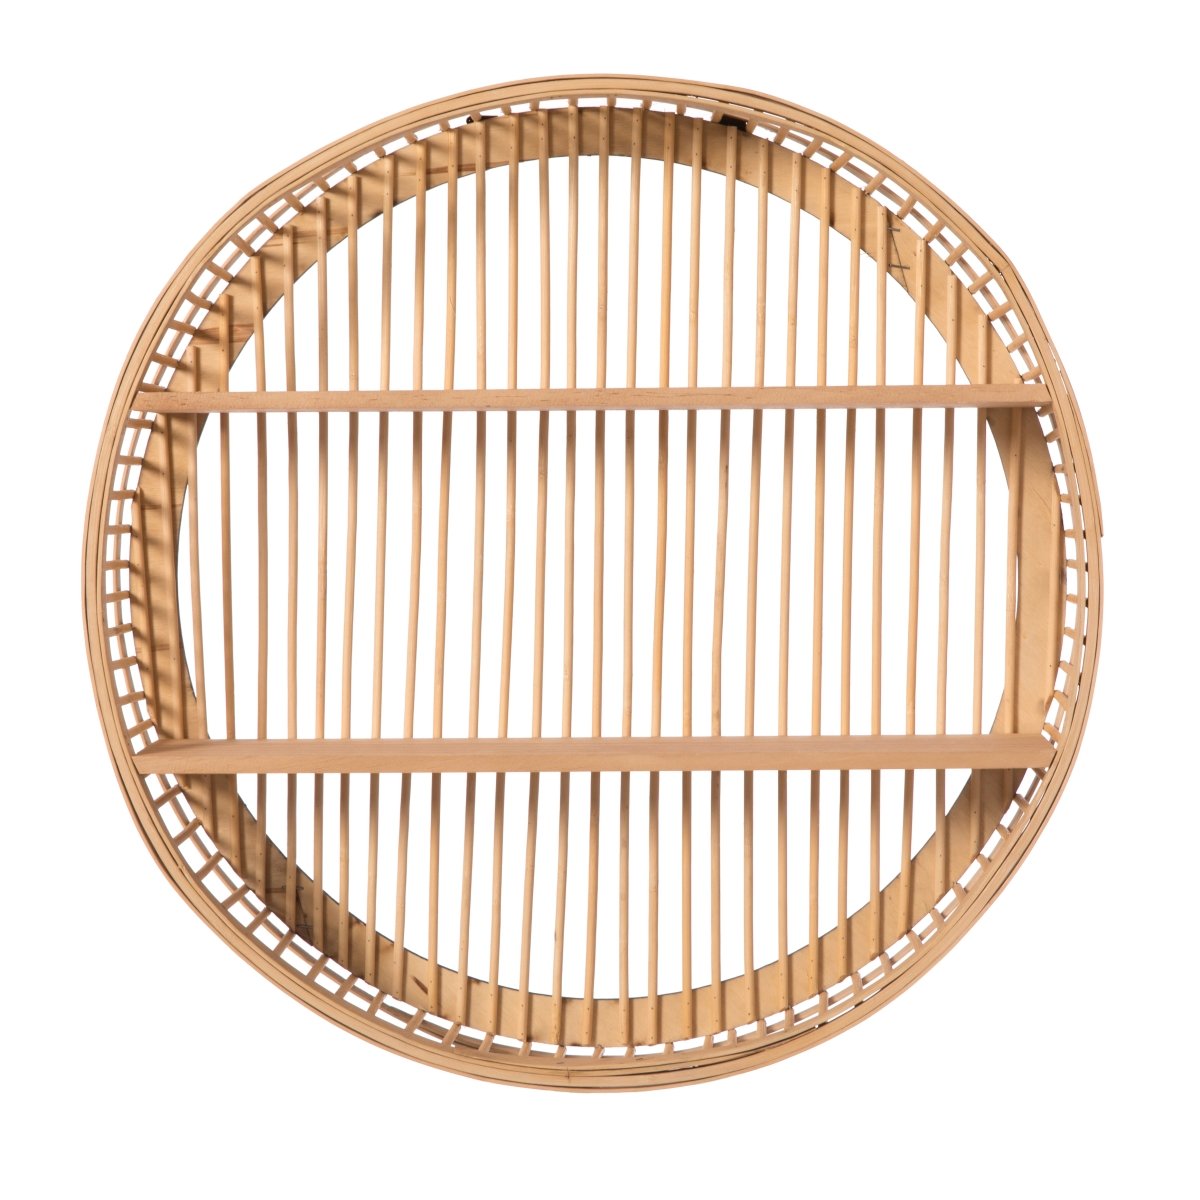 Picture of Vintiquewise QI004514 Decorative Rattan Round Display Shelf With 2 Shelves for The Dining Room, Living Room, or Office.